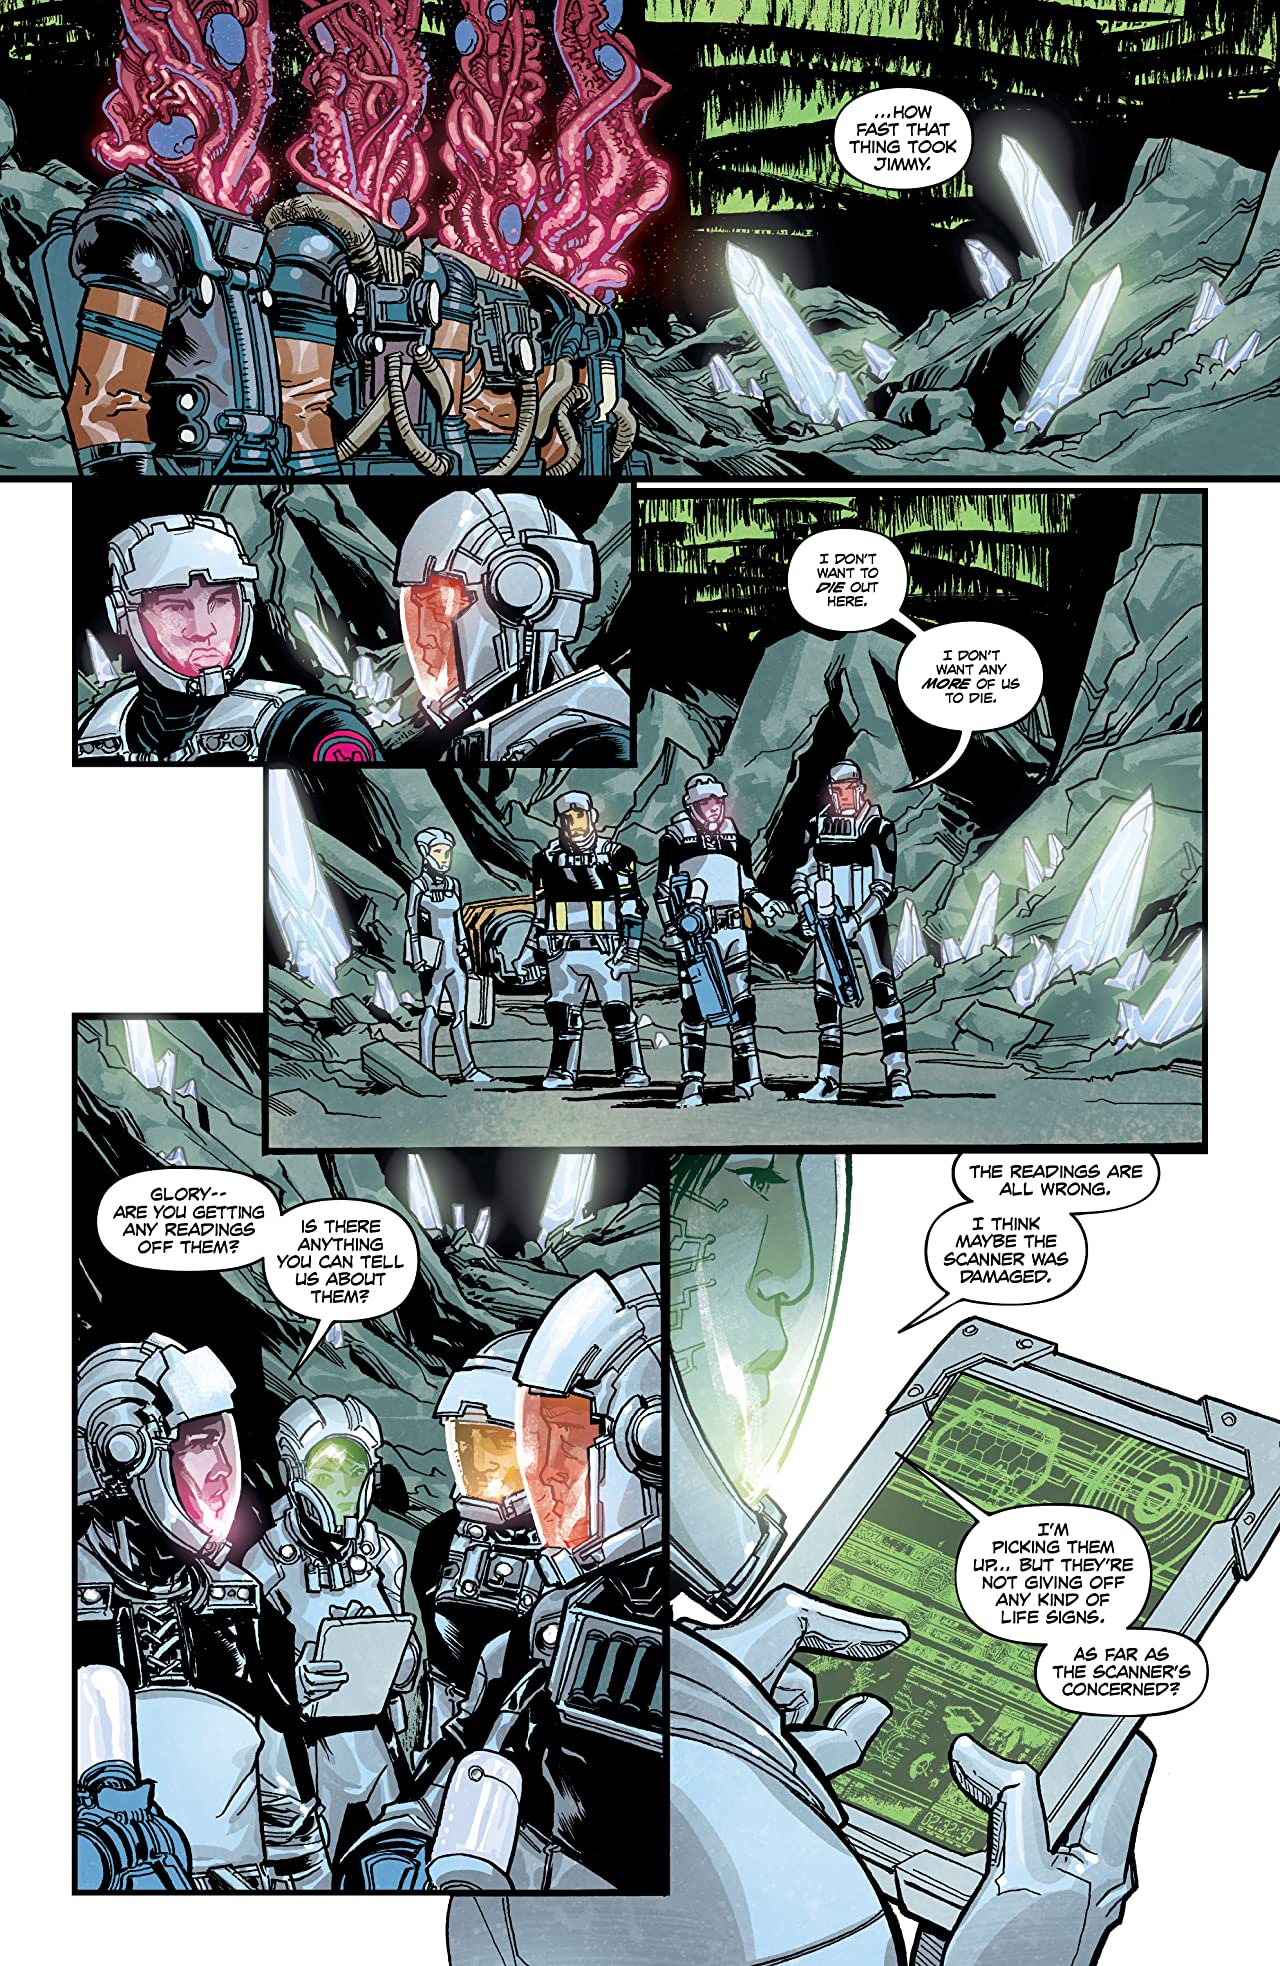 A series of panels shows four bodies controlled by fleshy masses of tentacles as four human members of the crew assess the situation.